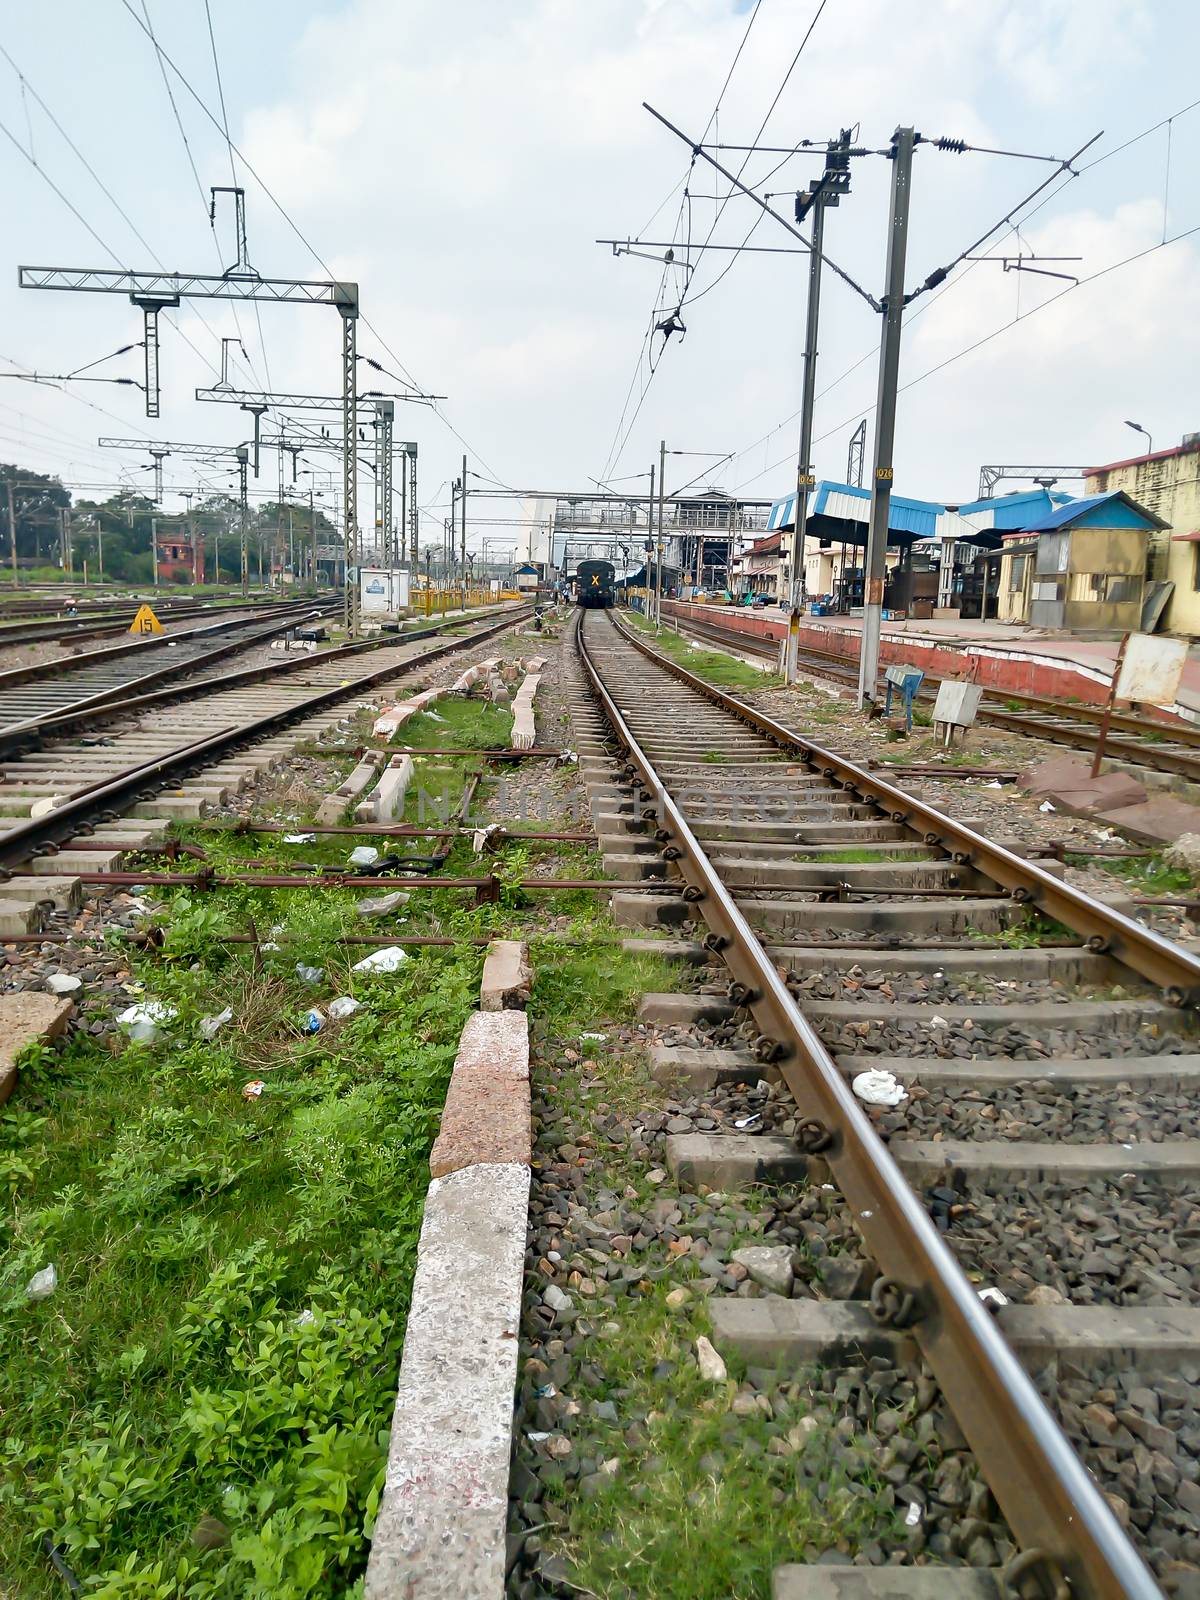 Close Up of Indian Railway Tracks low angel view from a rails sleepers near railway station platform during day time in Howrah Station car shed area. Kolkata India South Asia Pacific March 18, 2020